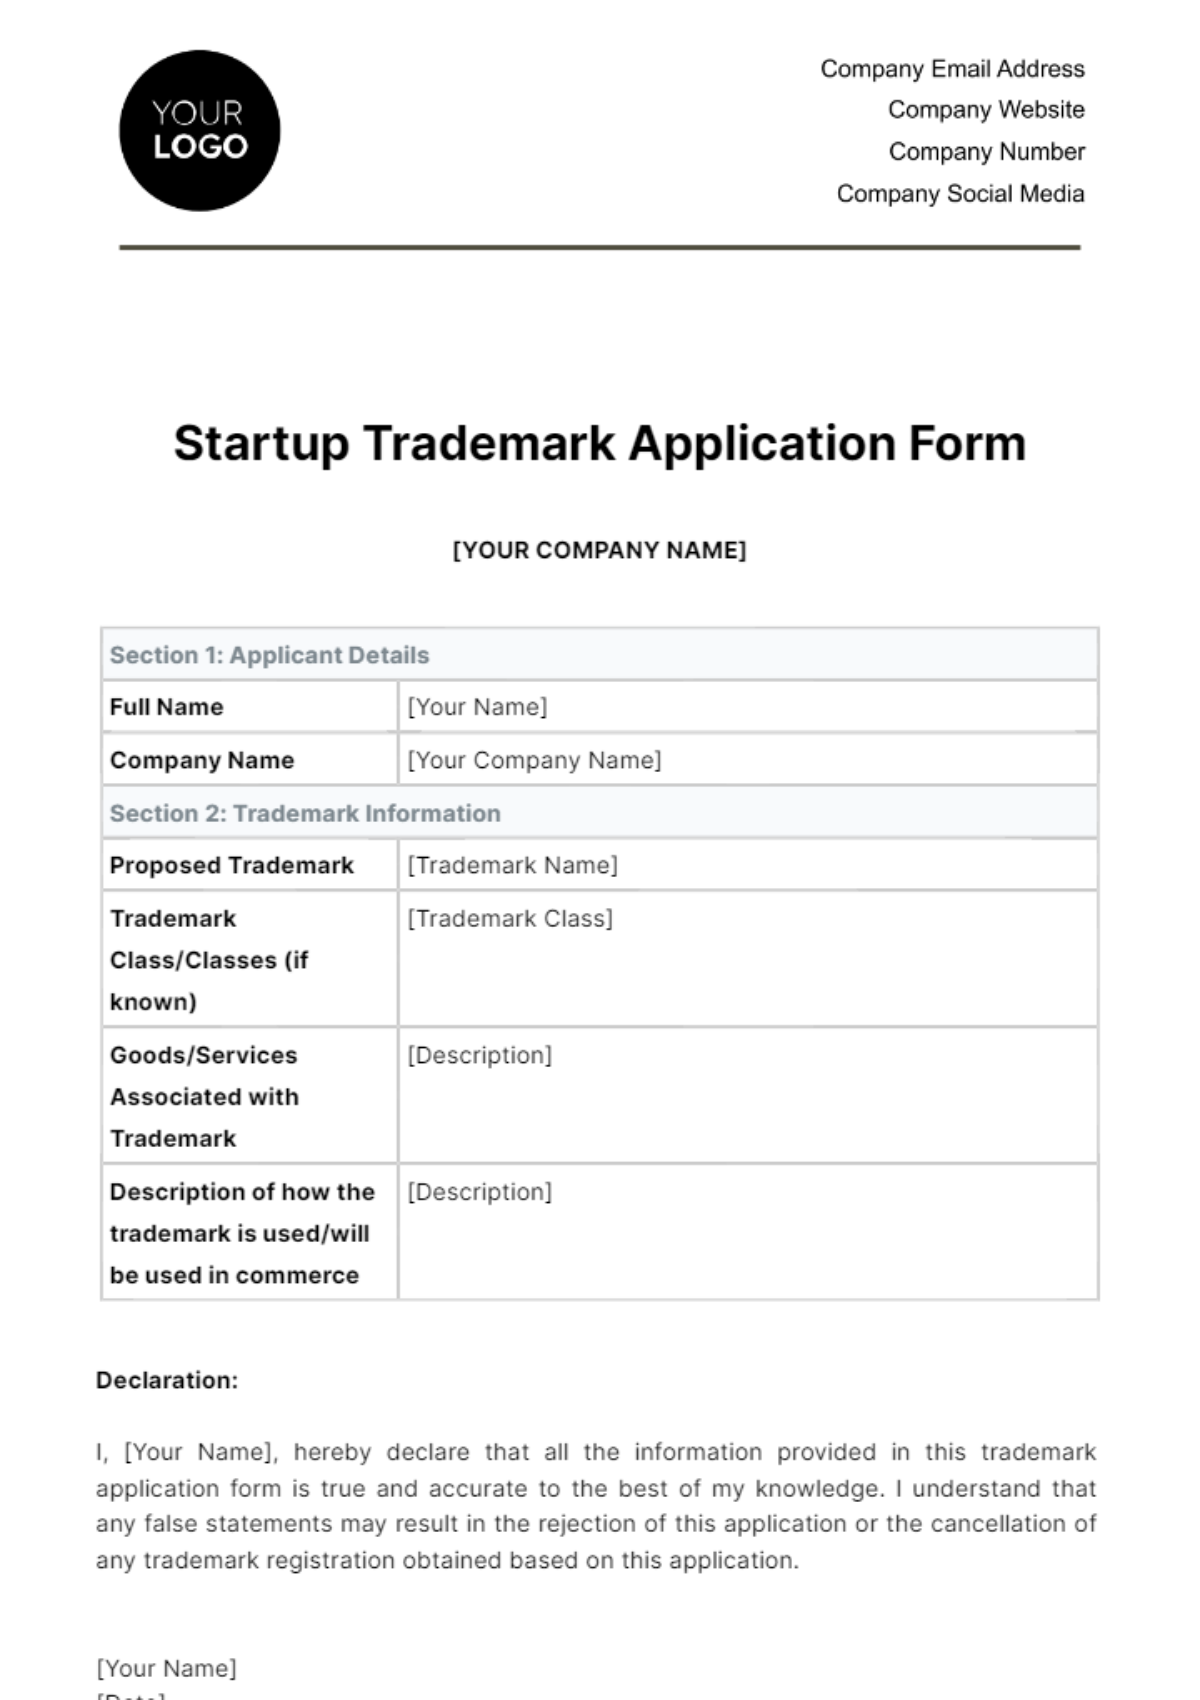 Startup Trademark Application Form Template